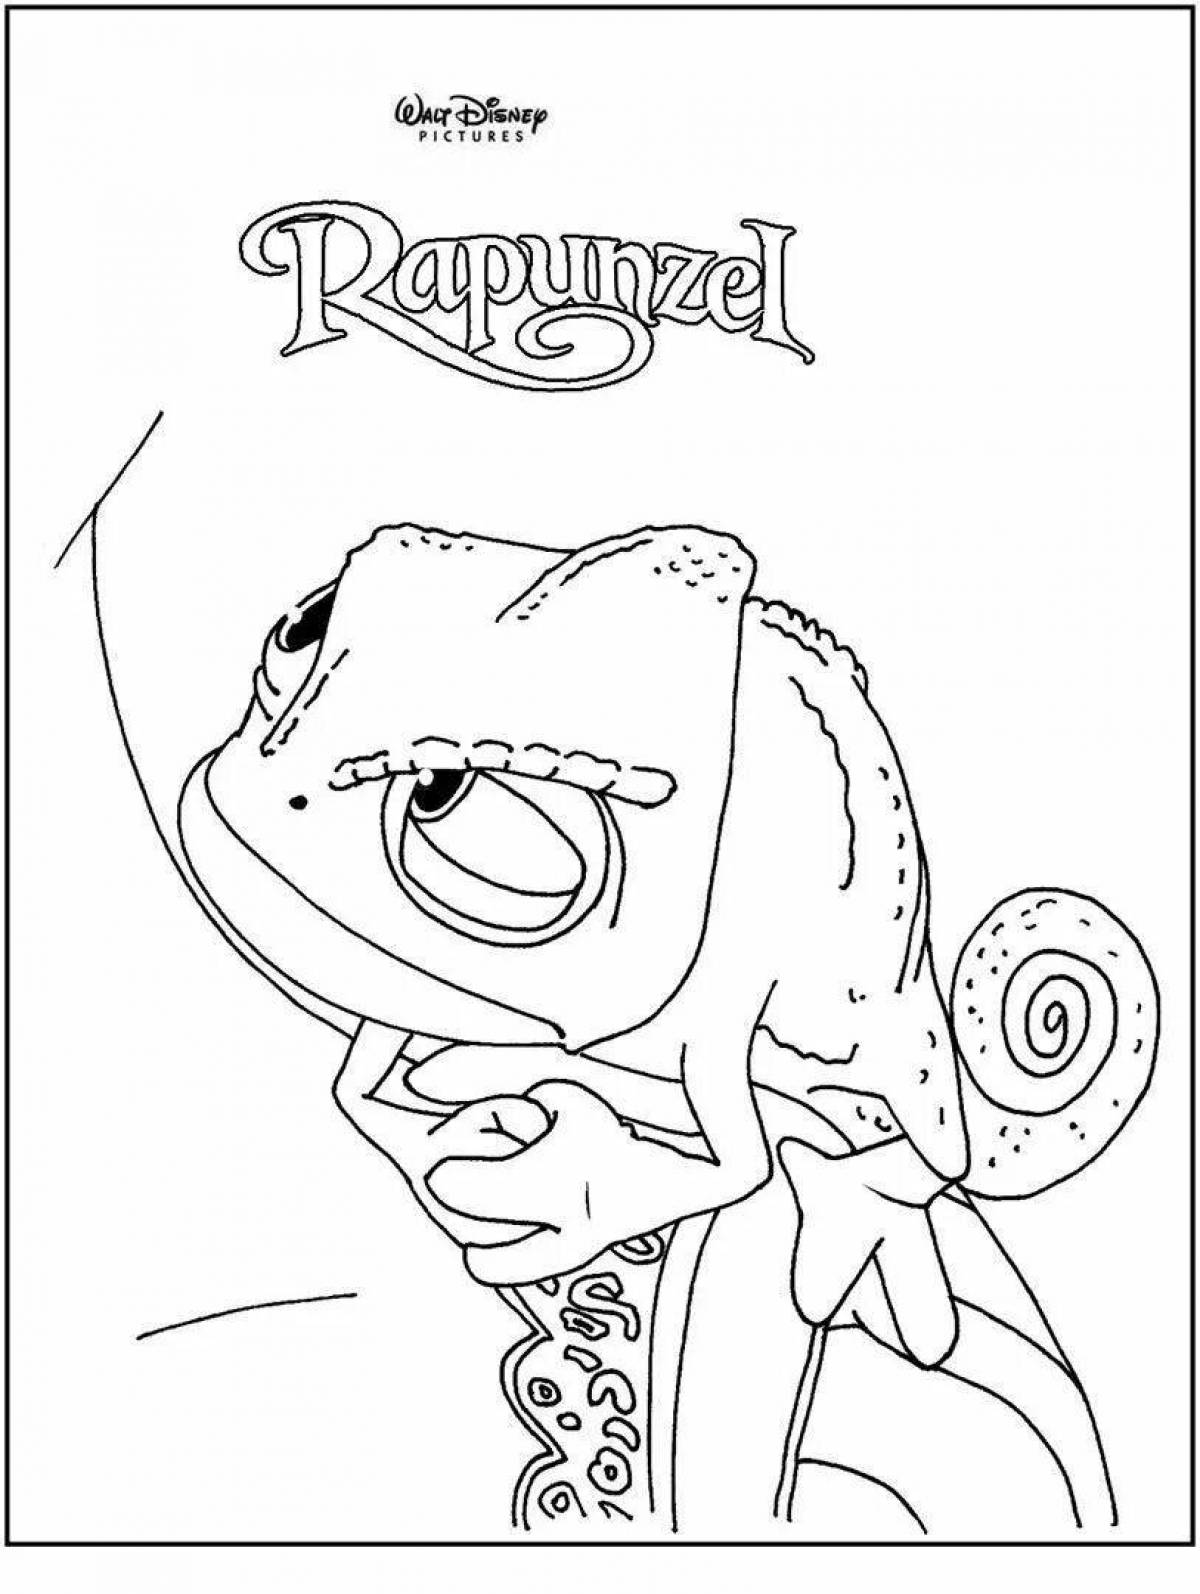 Charming pascal coloring book